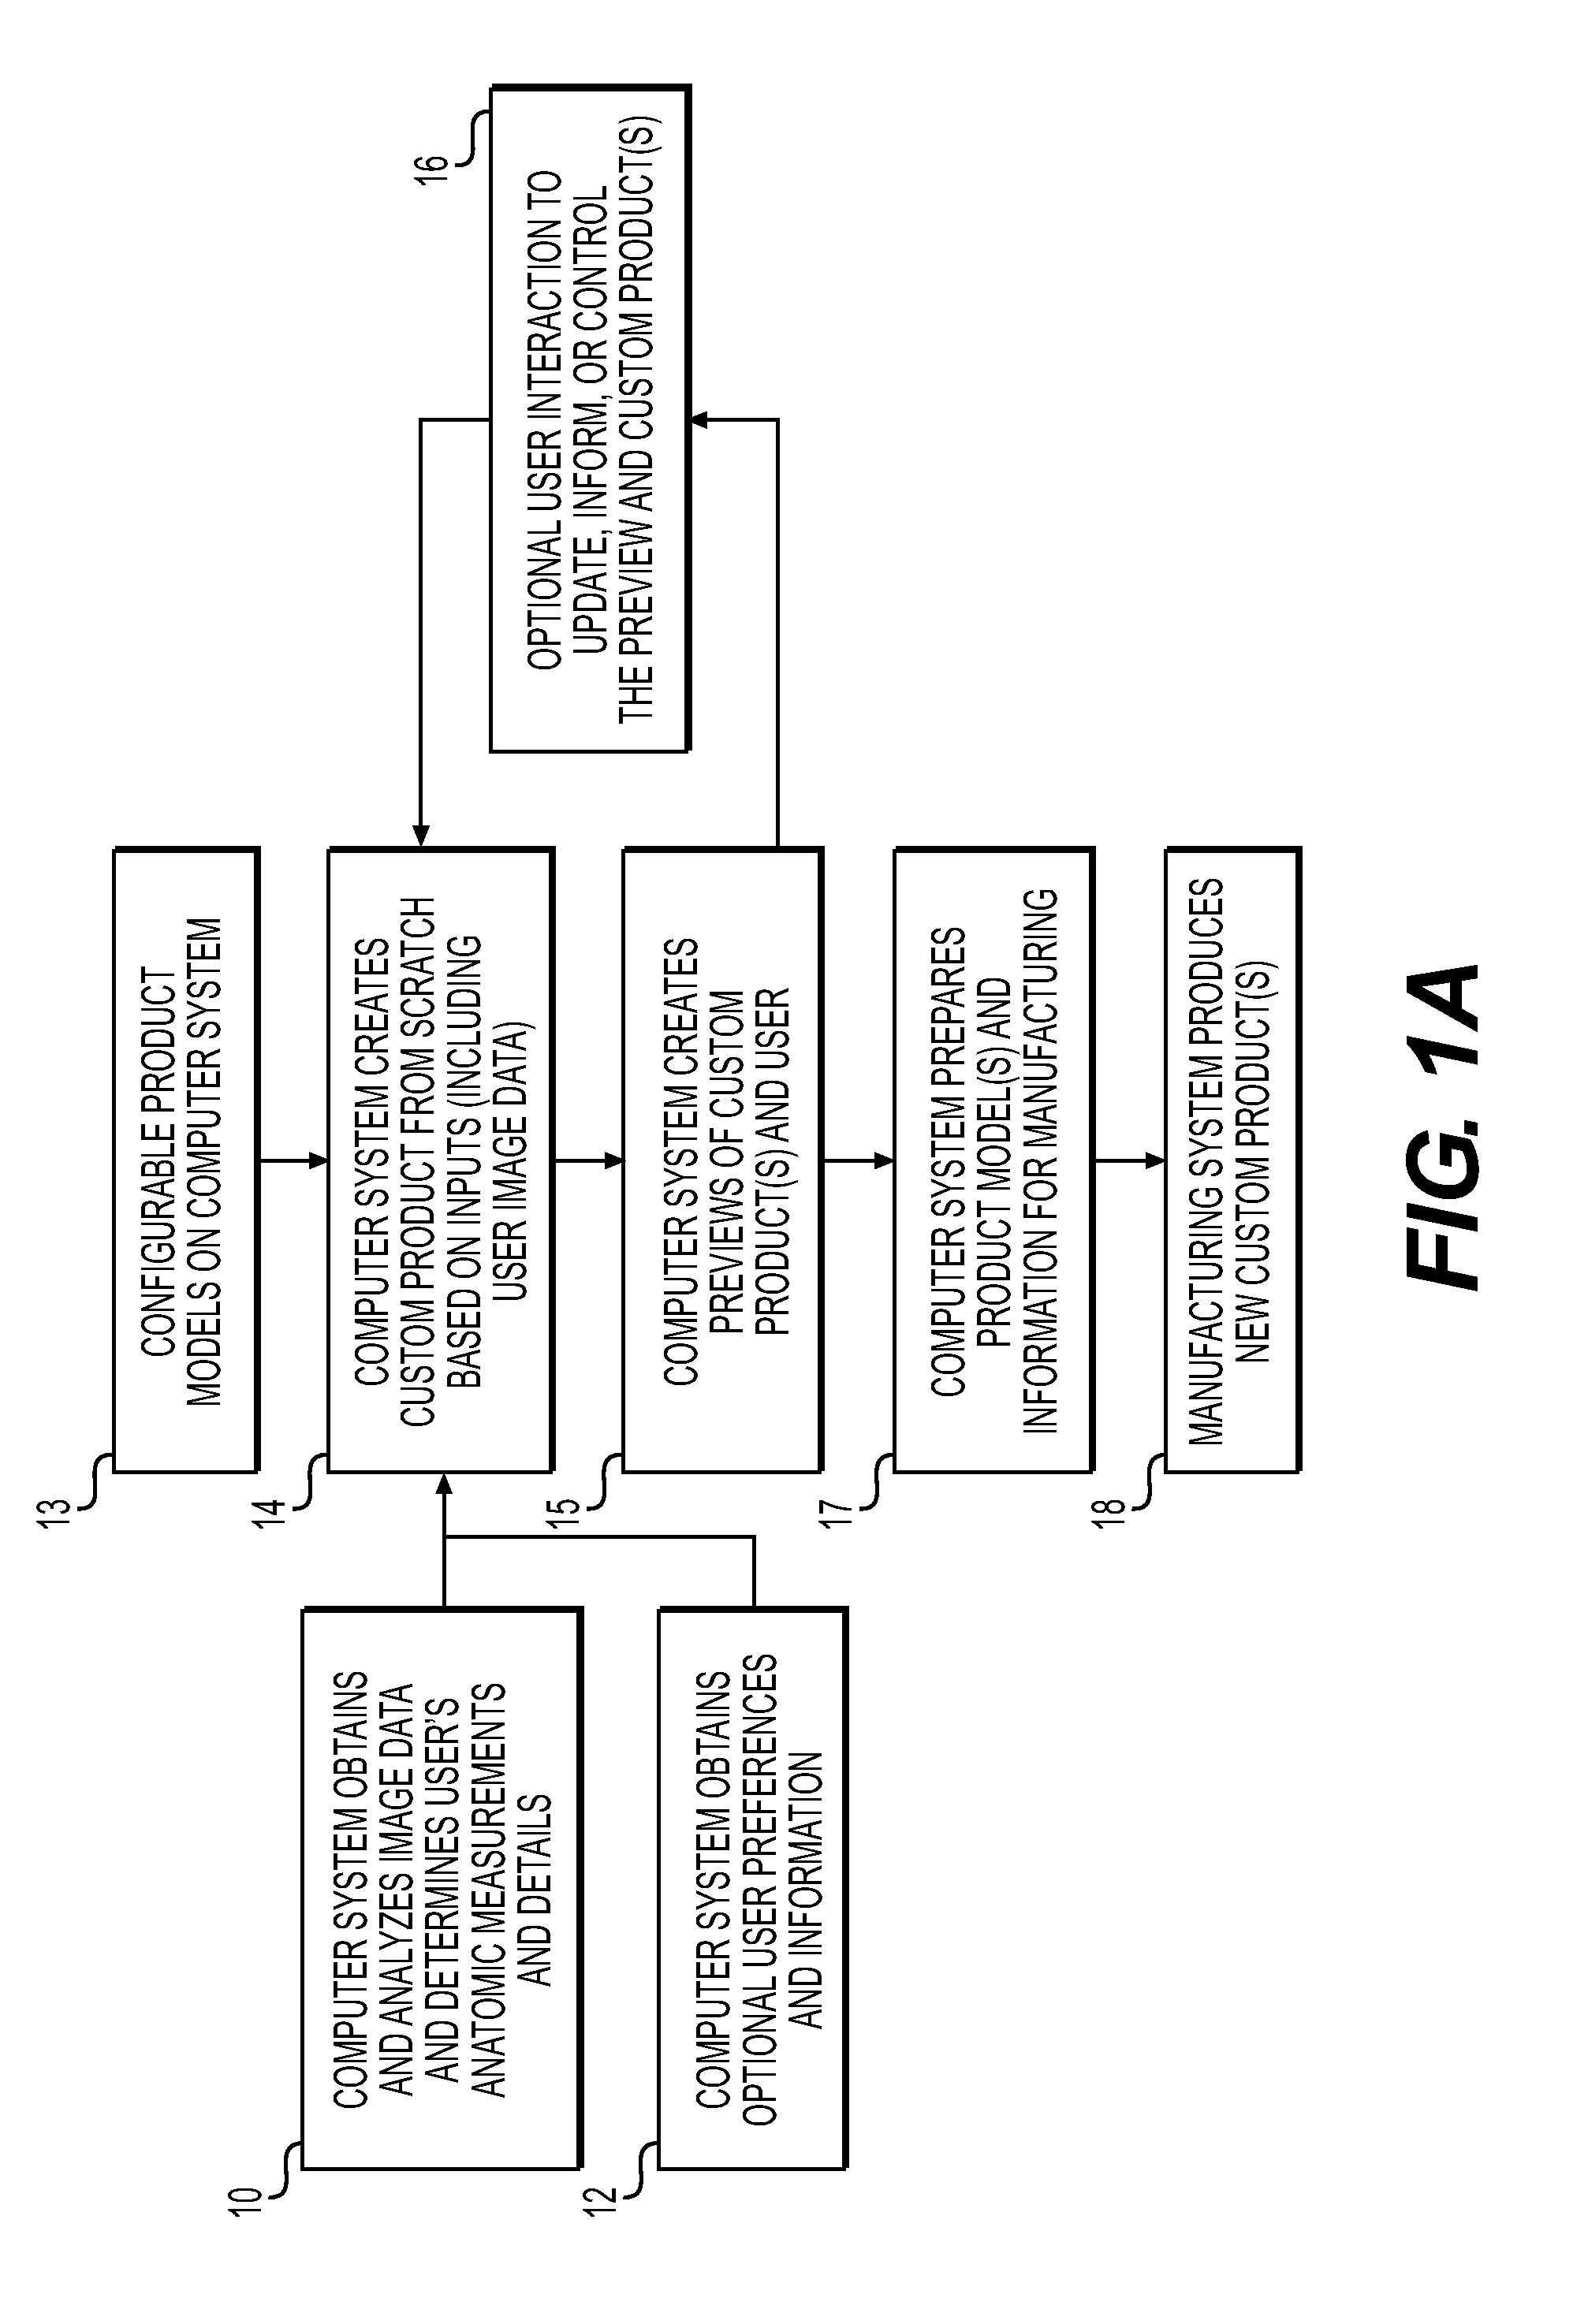 Method and system to create products